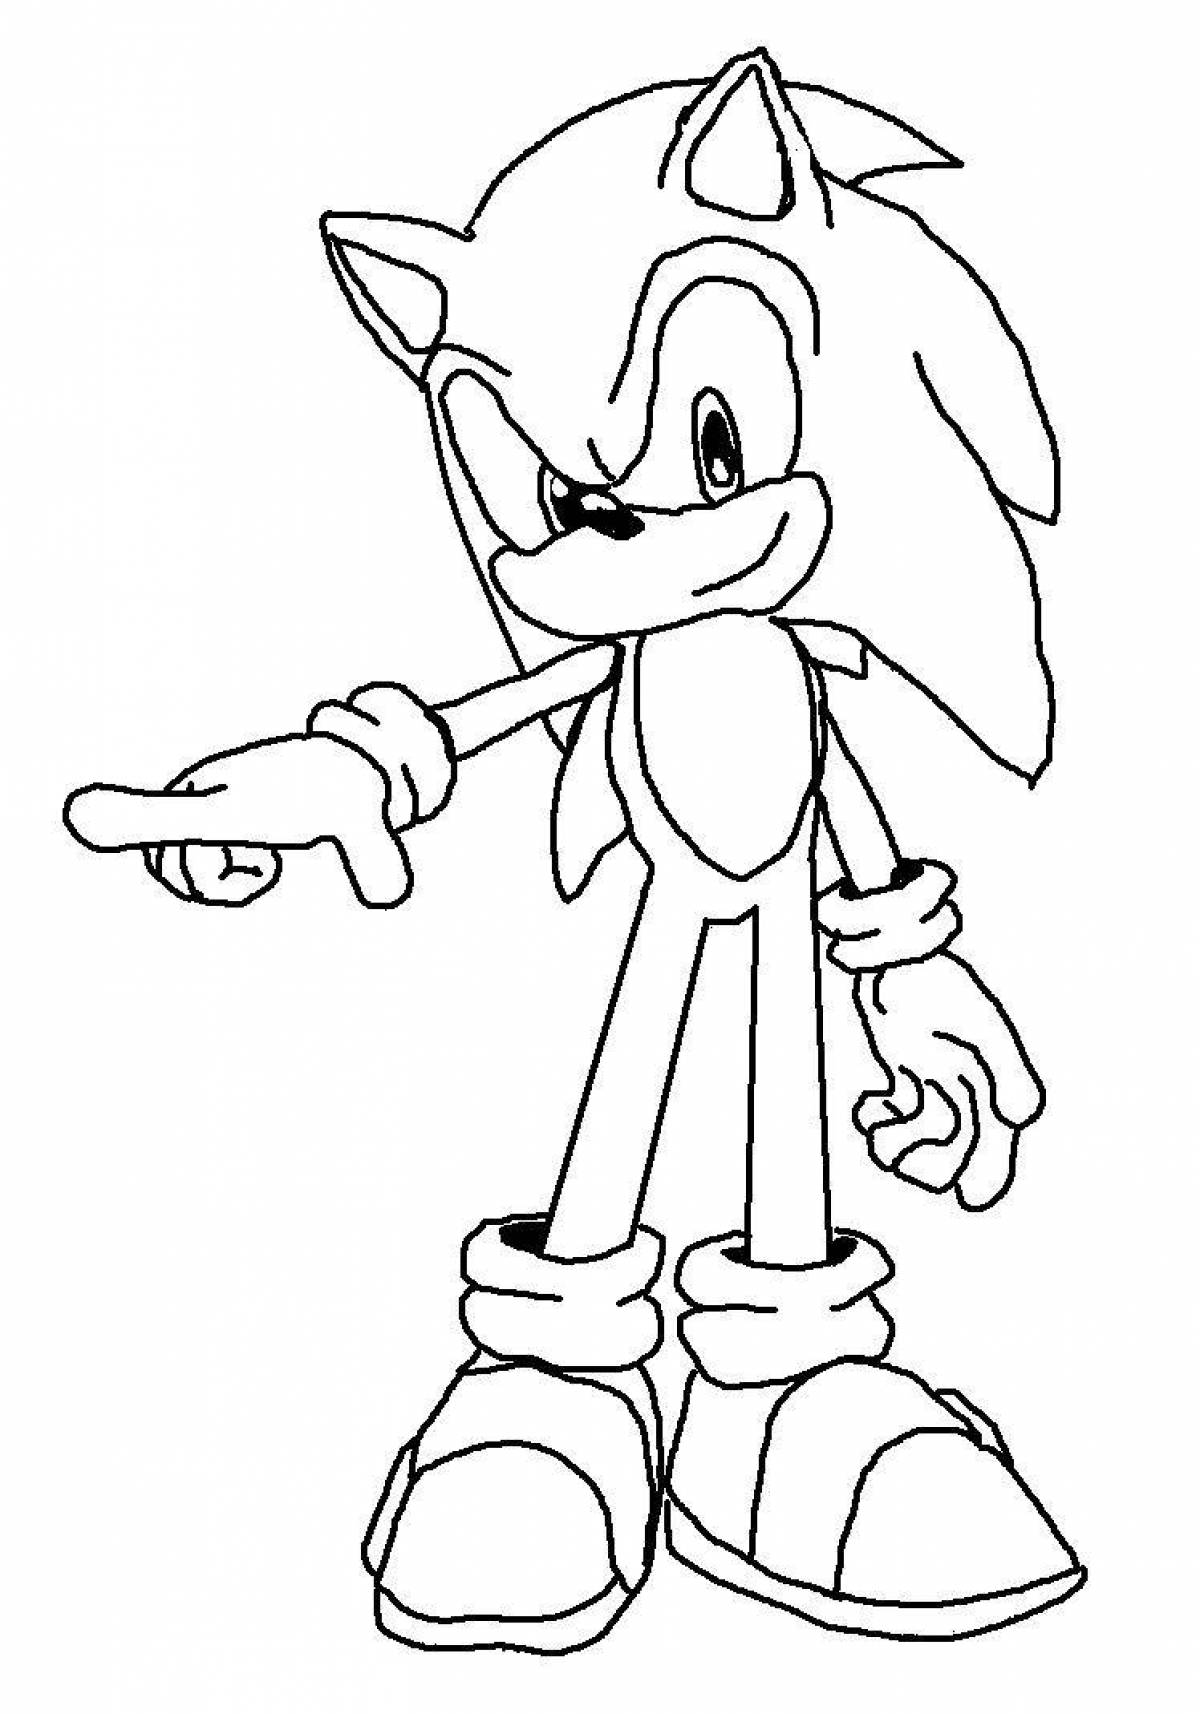 Awesome sonic coloring book